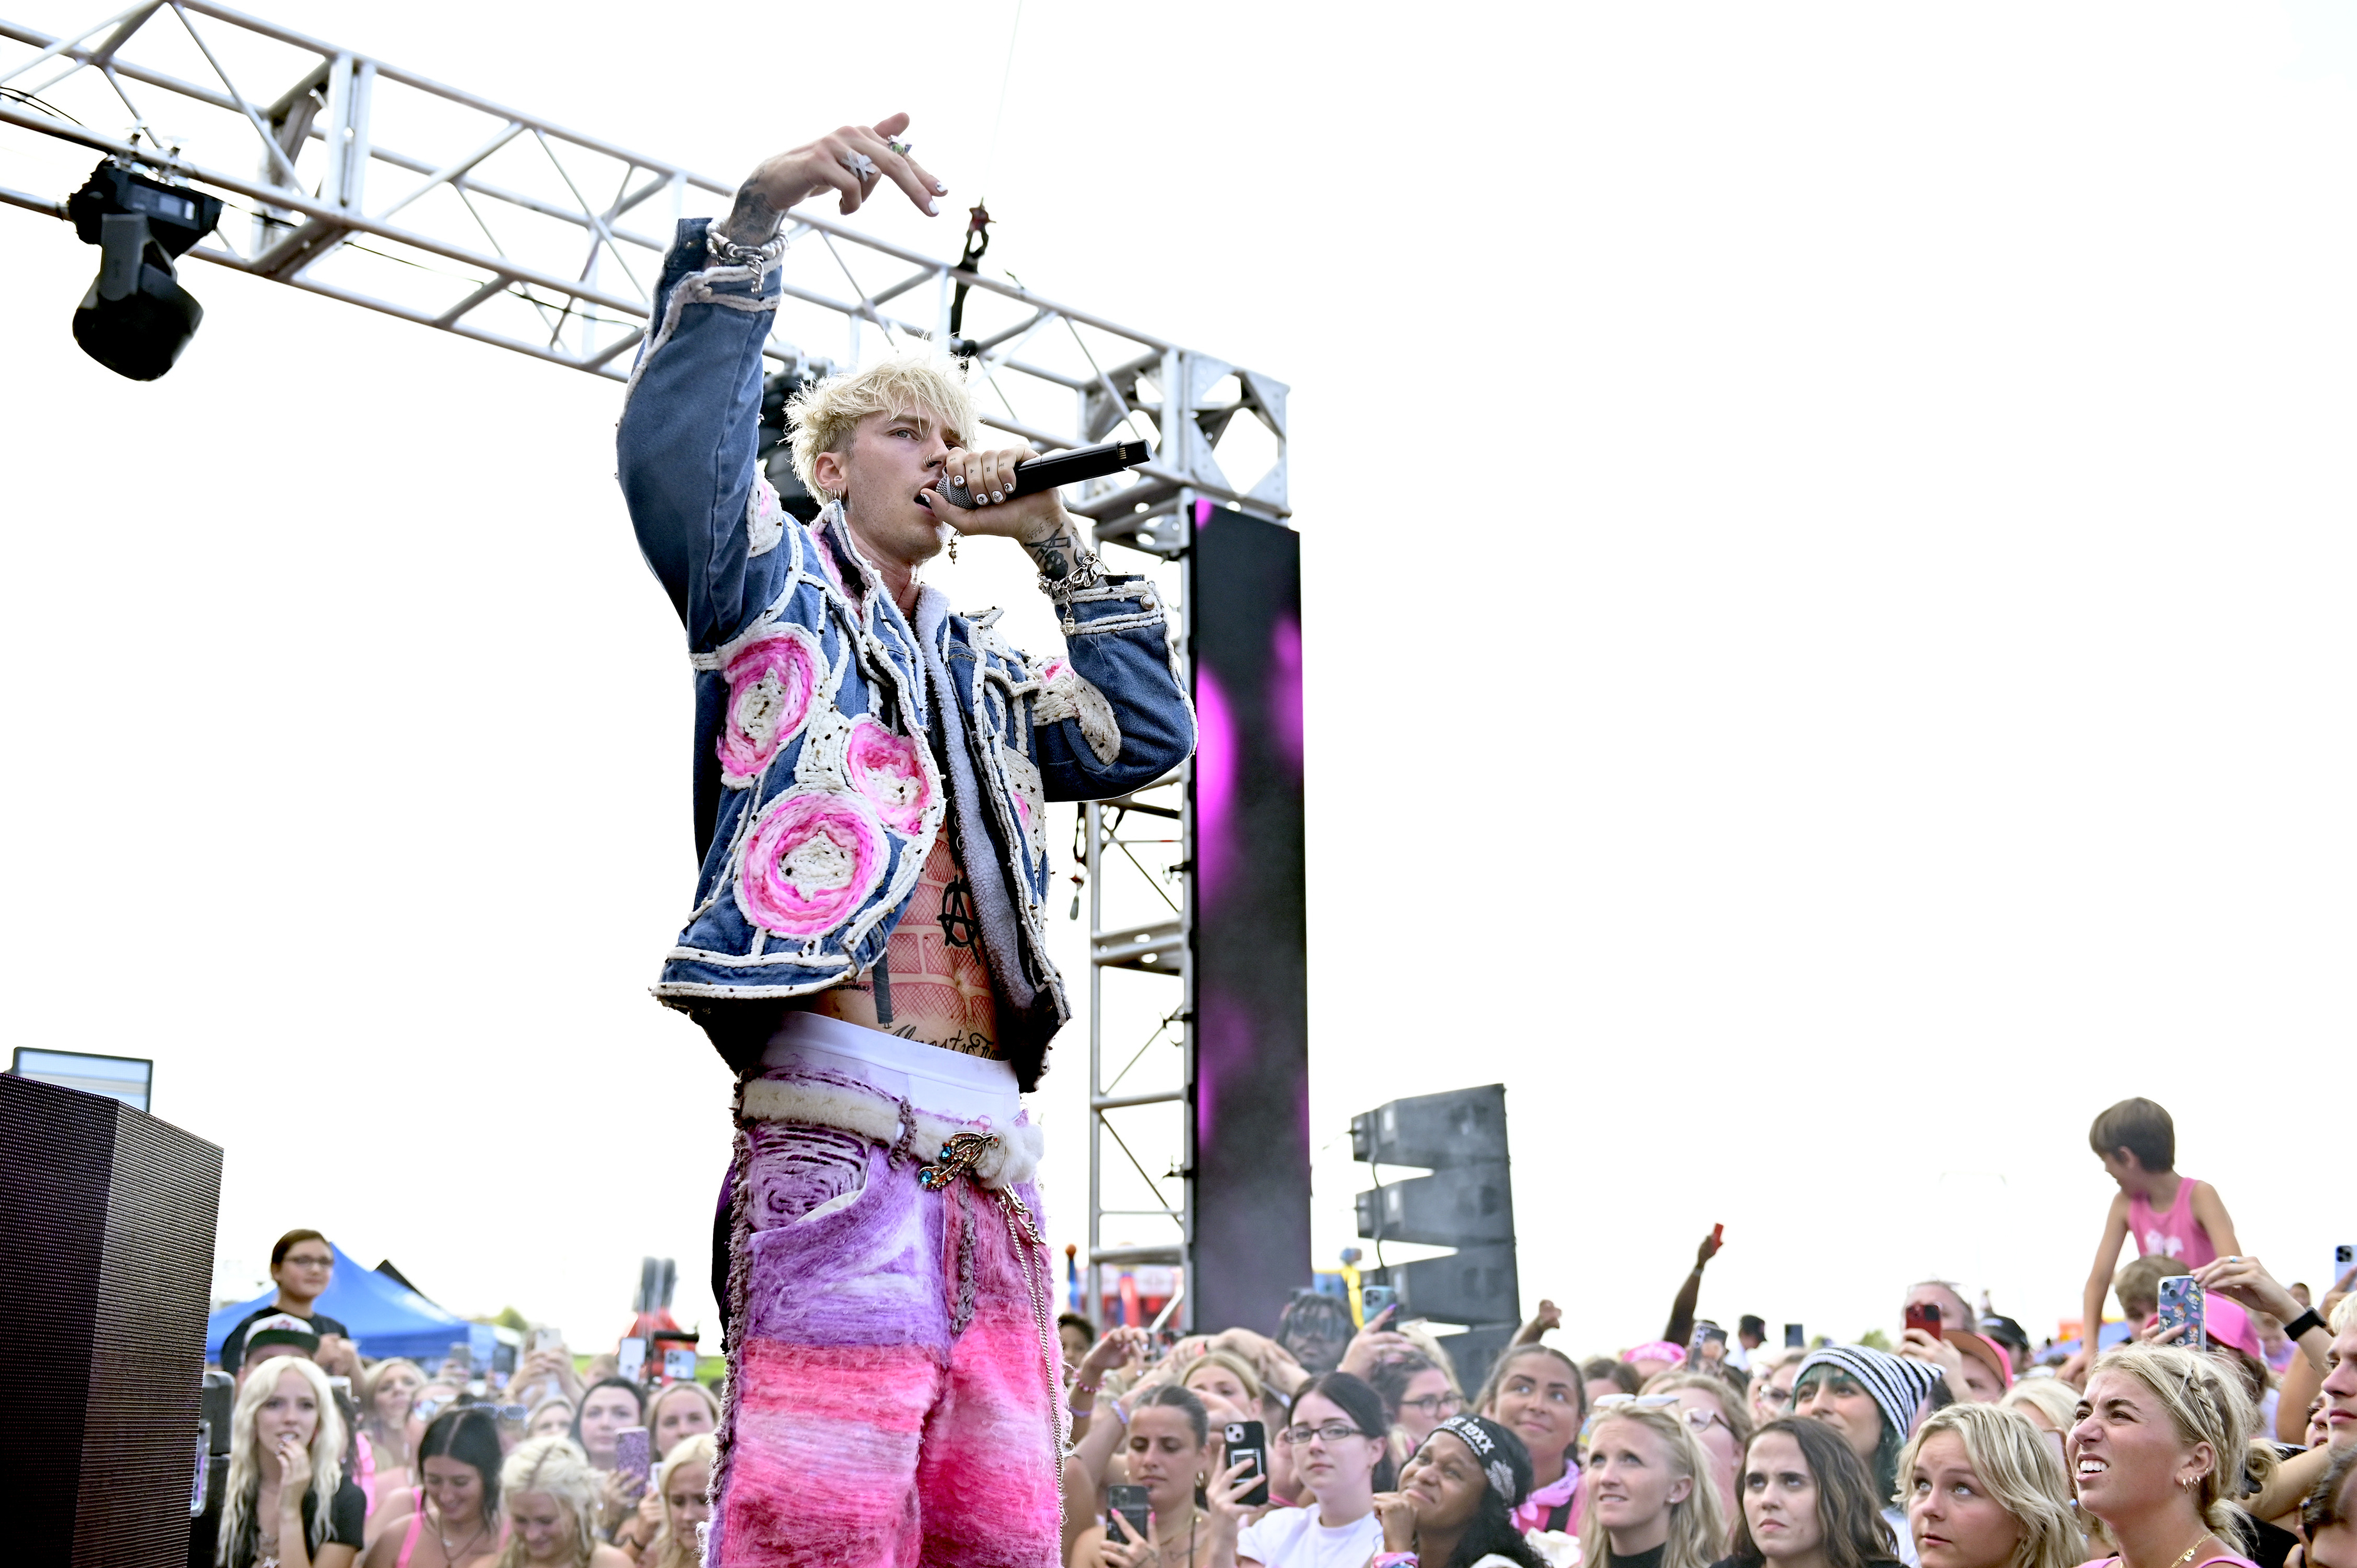 Machine Gun Kelly in a vibrant jacket and pants singing into a microphone on stage before an audience